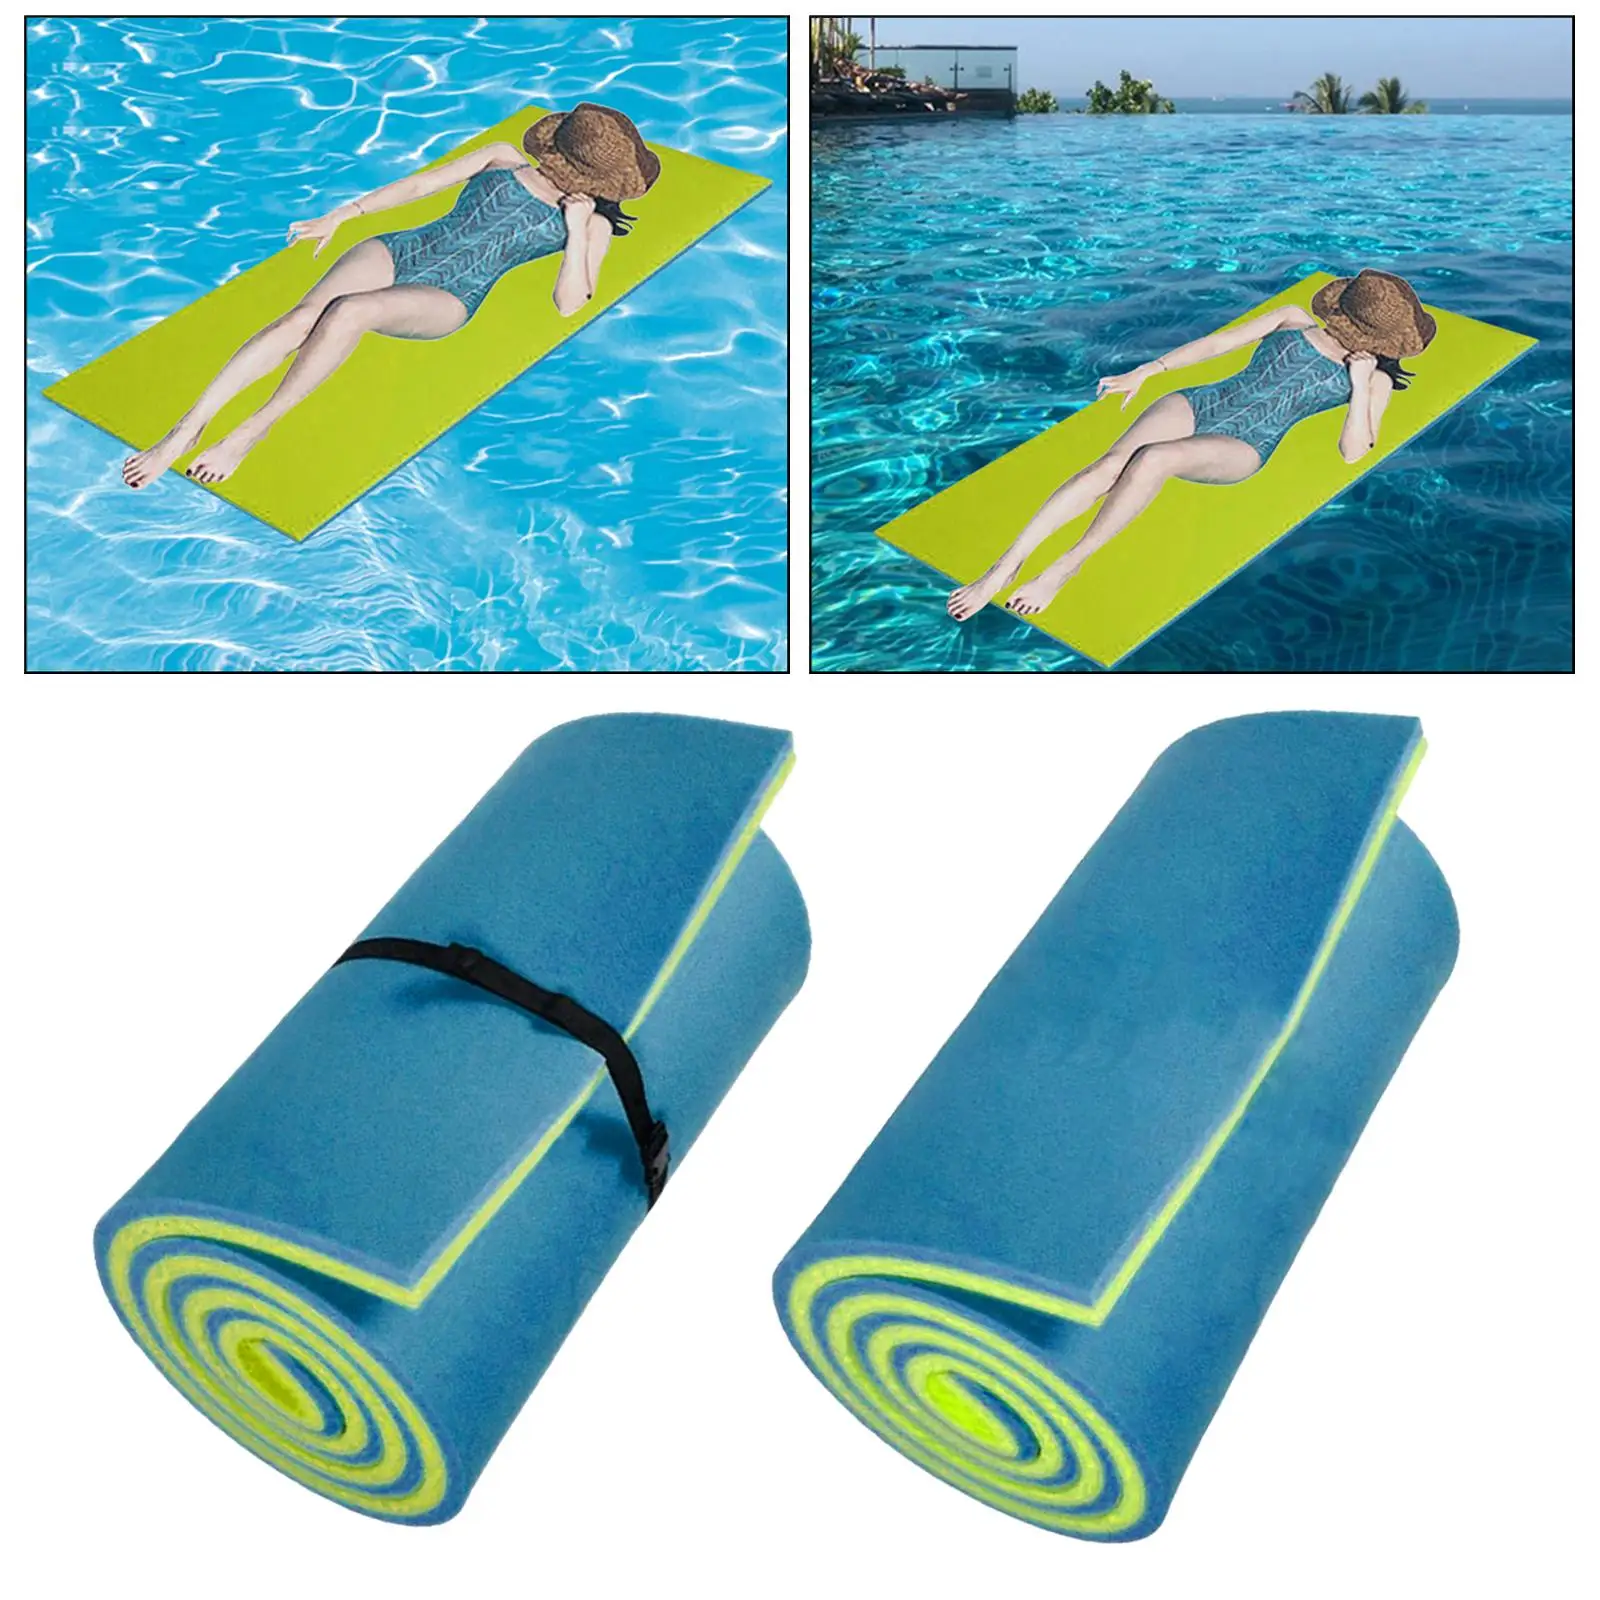 Water Floating Mat Floating Raft for Lounge Mattress Durable Relaxing Floating Pad Lounger Float for Party Outside Outdoor